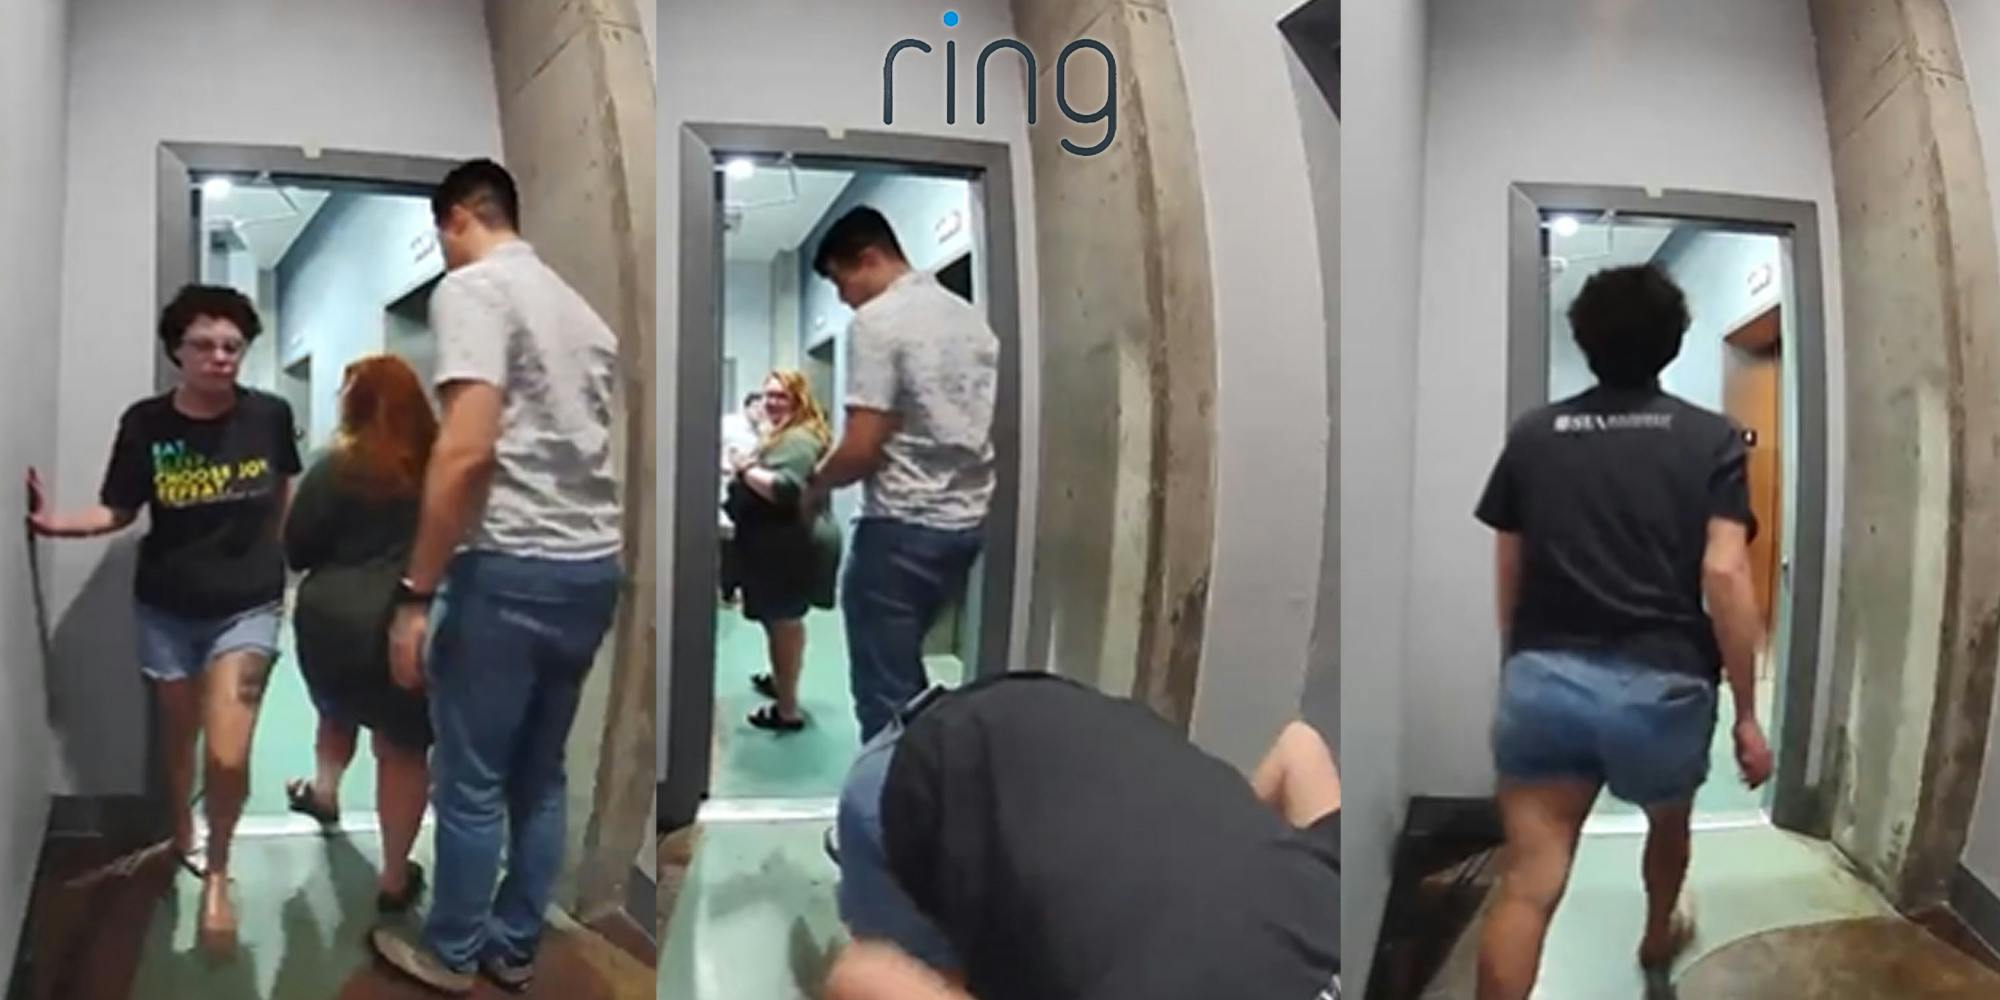 woman walking by people in hallway towards ring camera owners door (l) woman bending over looking at ring camera owner's packages people turned looking at her "ring".com logo centered above (c) woman walking away in hallway after looking at packages (r)